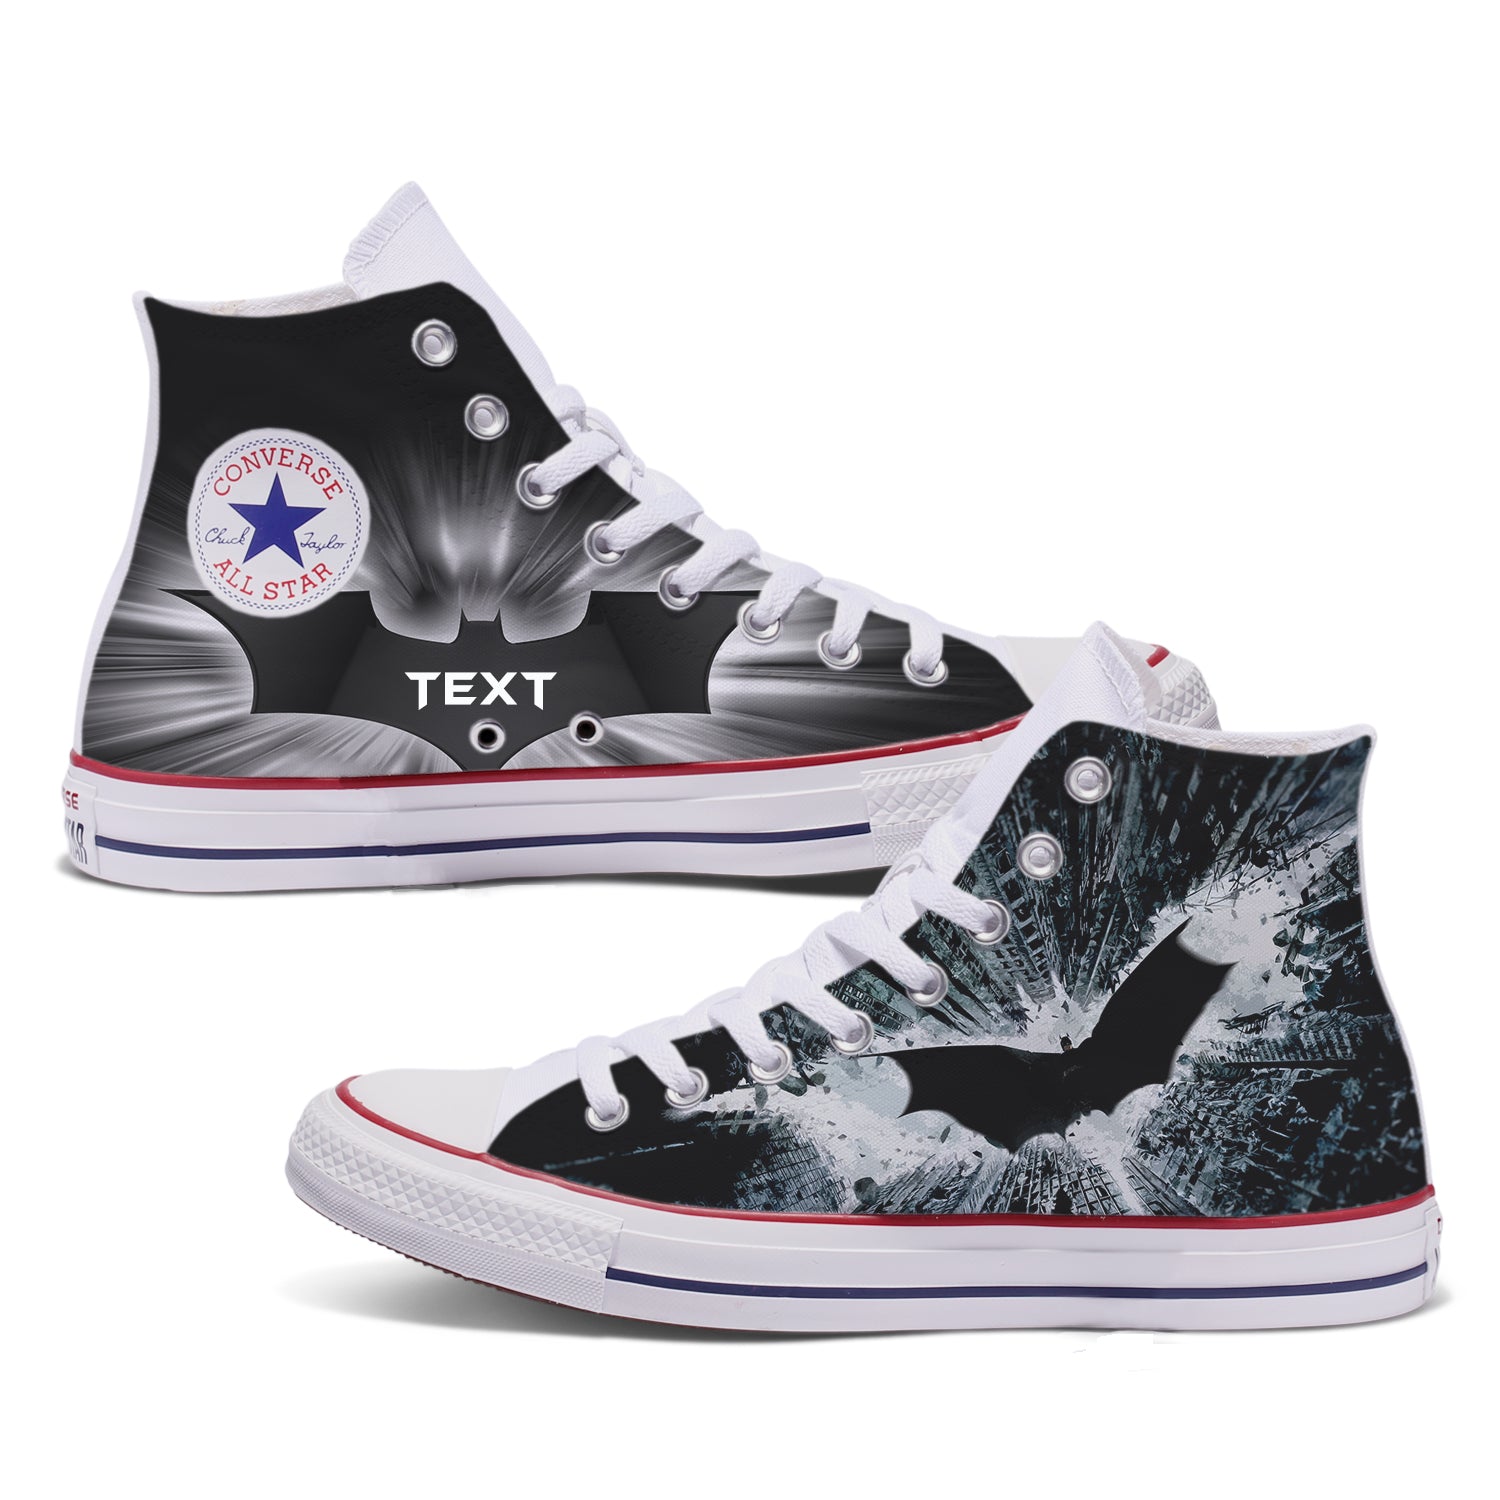 Custom Painted Converse INSPIRED by Characters Resembling 